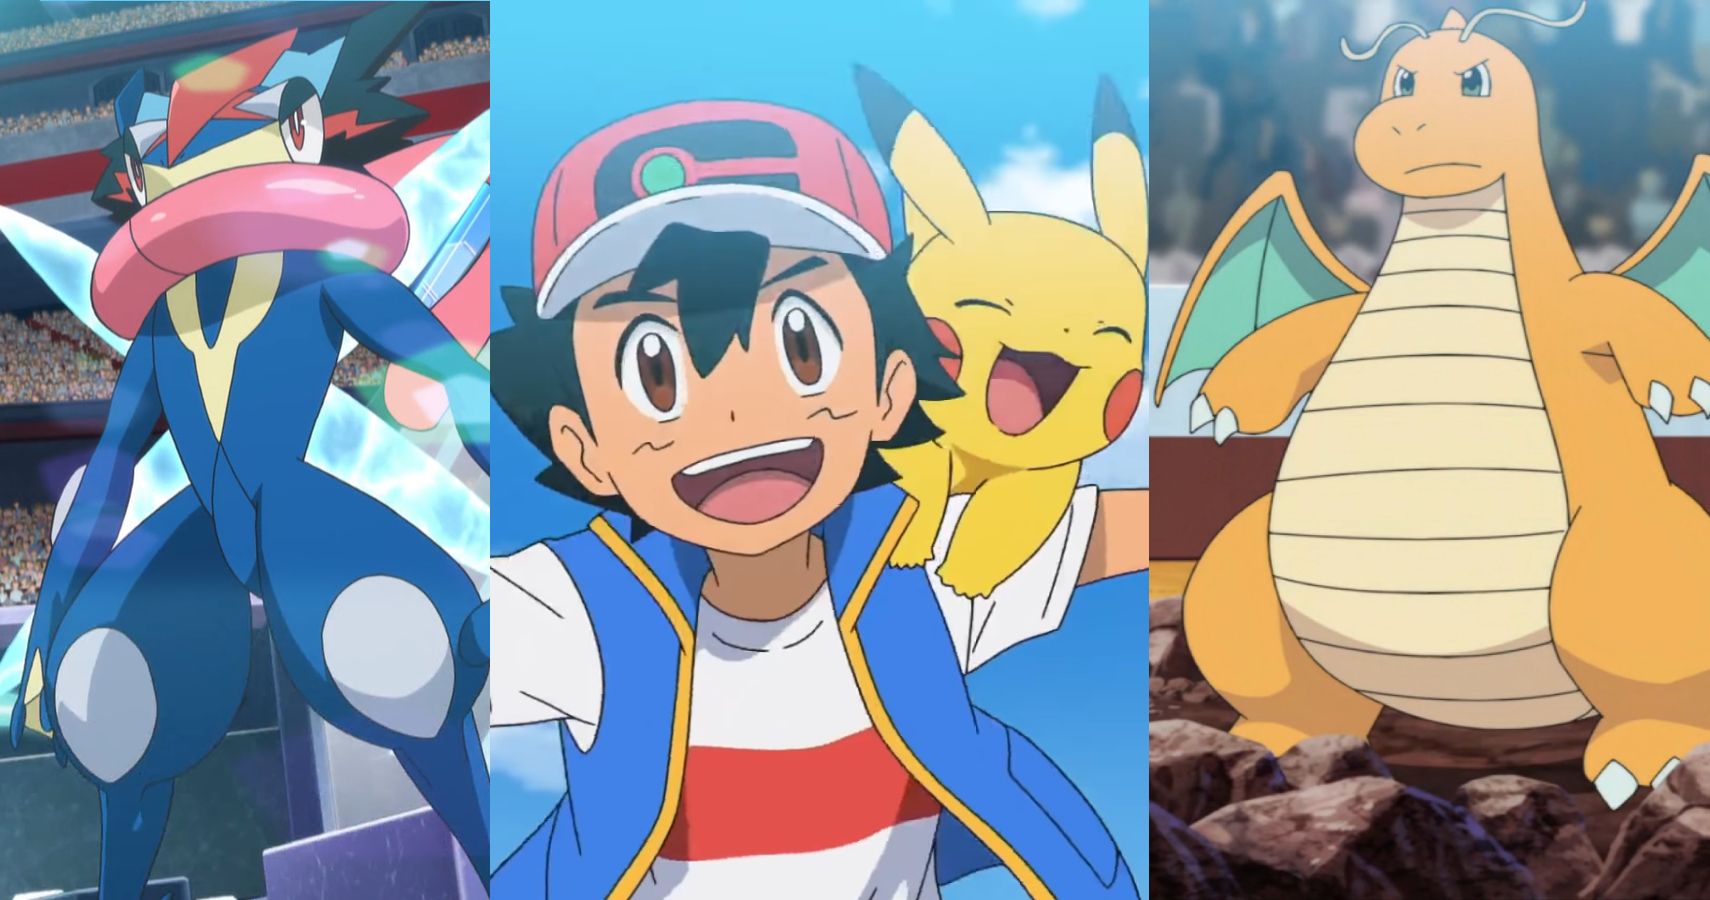 The Strongest Pokemon Ash Ketchum Has Caught In Each Region